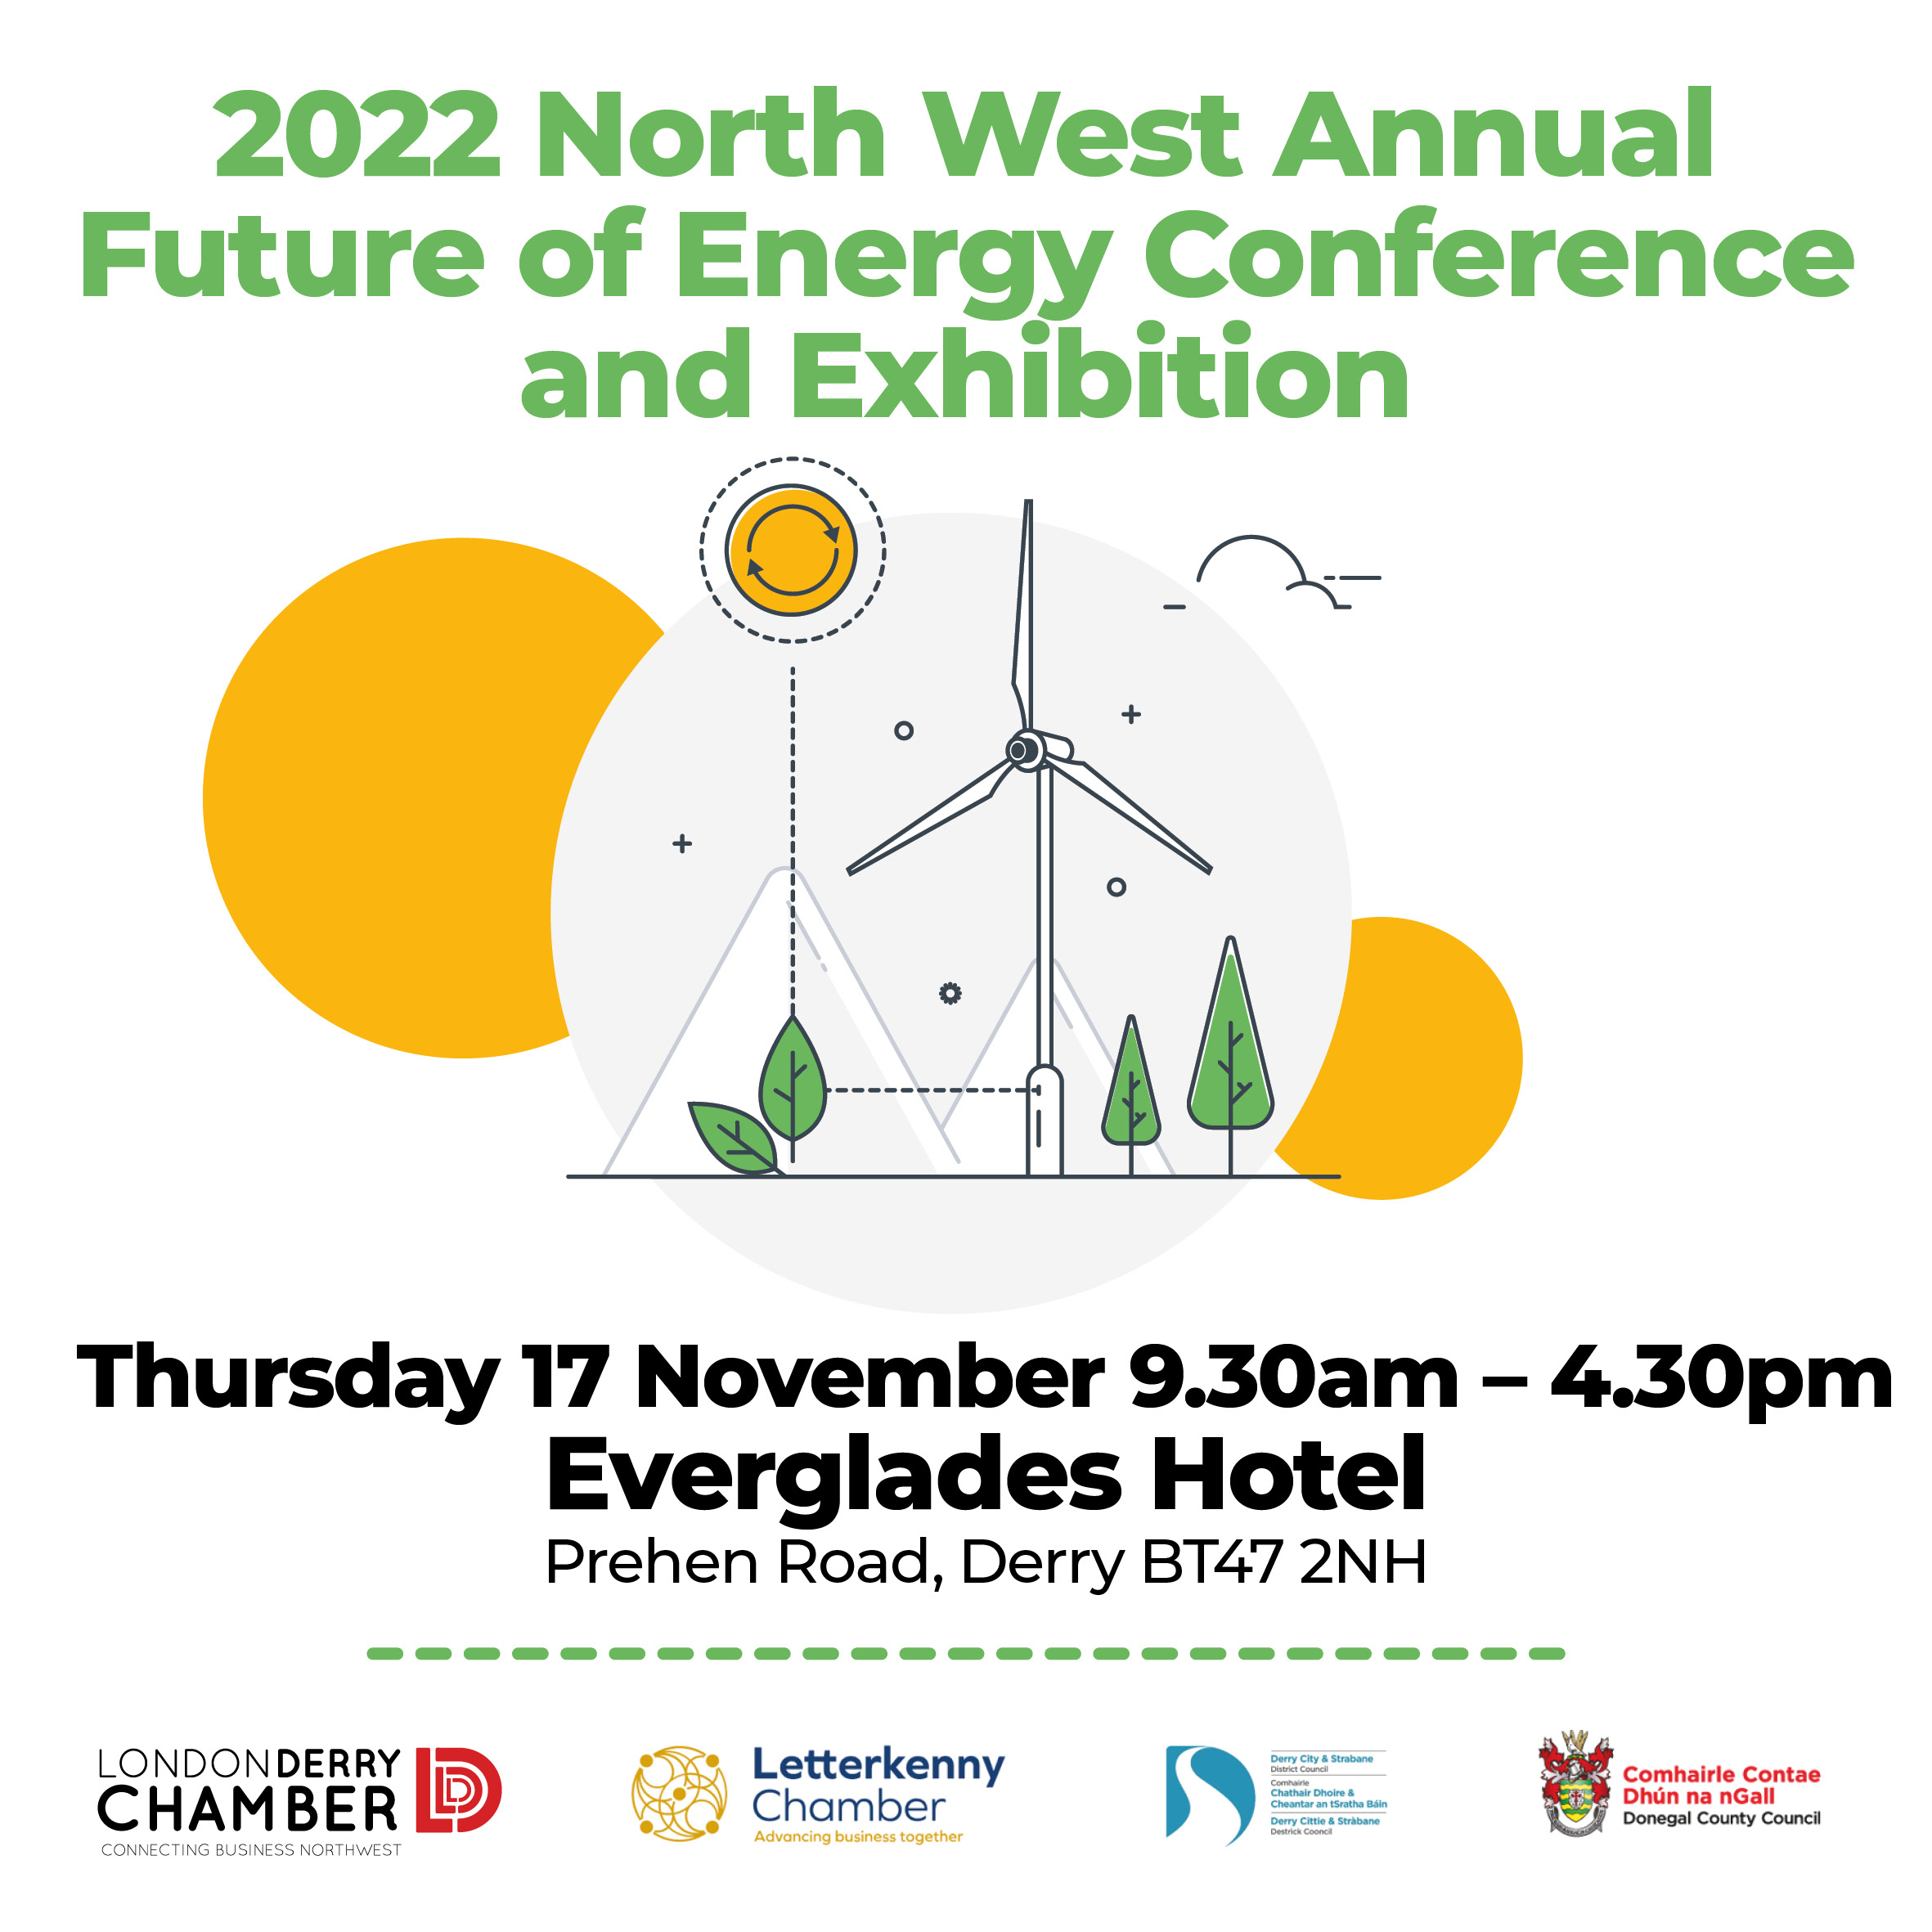 2022 North West Annual Future of Energy Conference and Exhibition